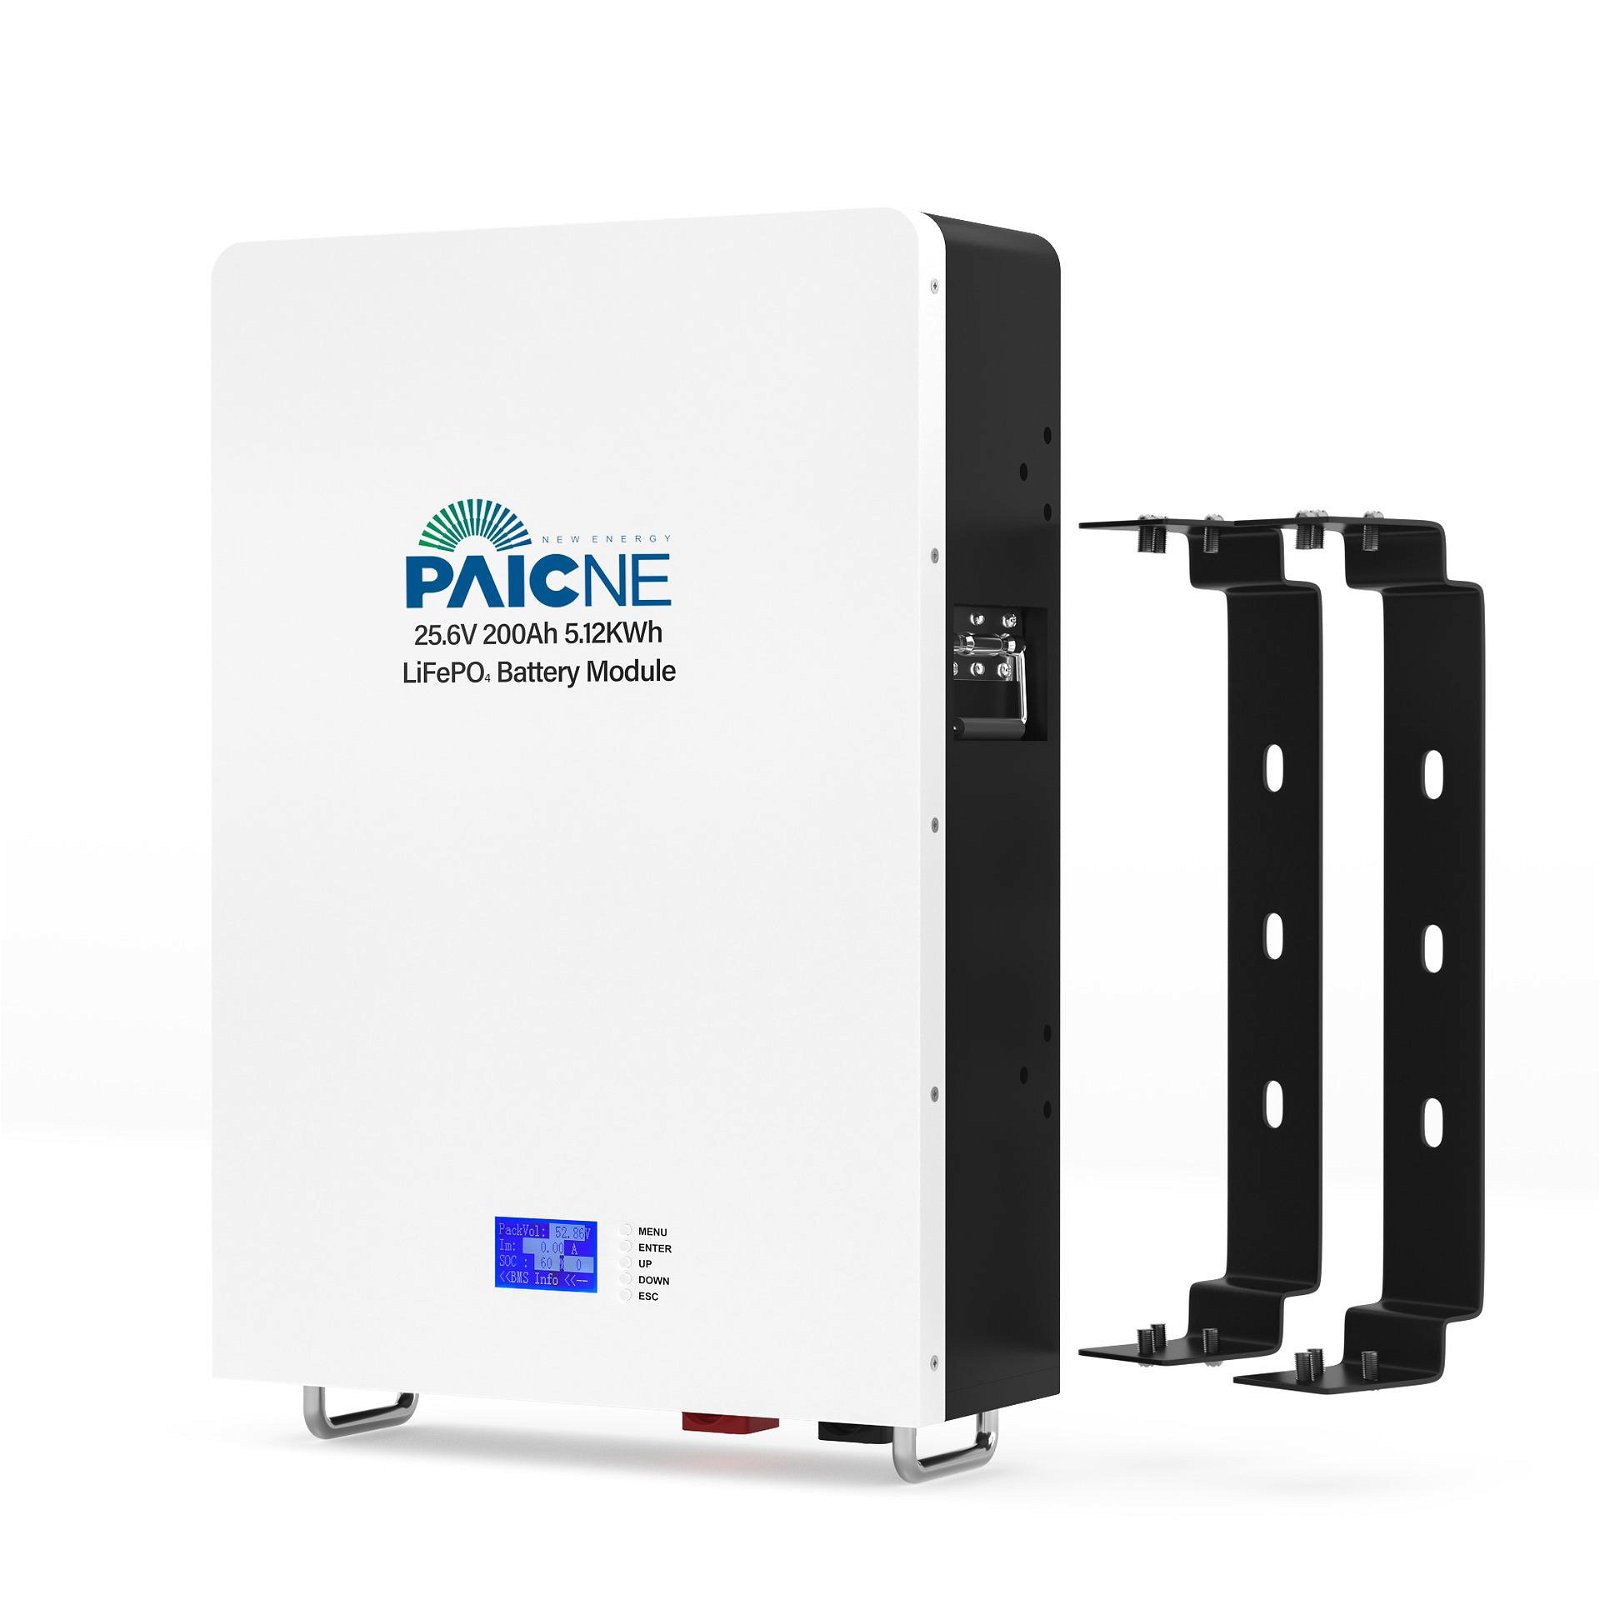 Wall mounted energy storage system, home energy storage backup power supply 3